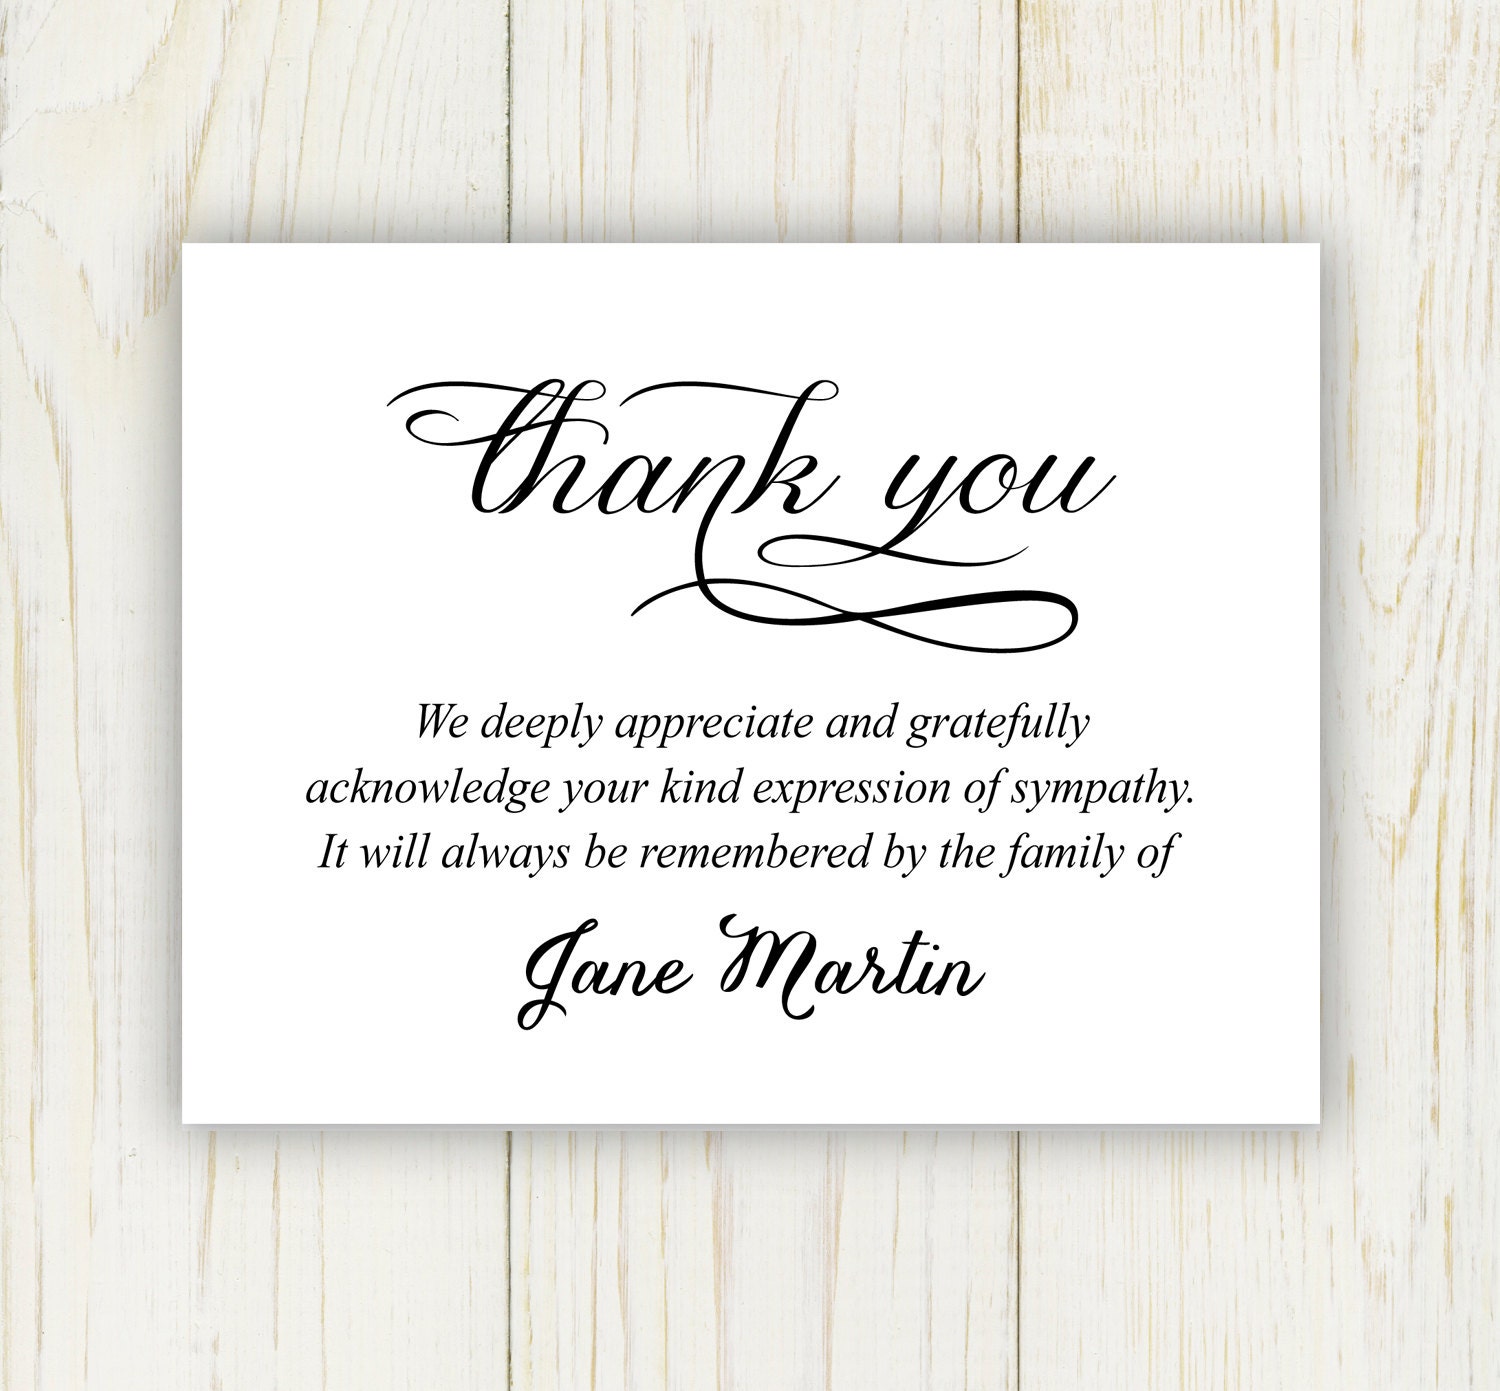 white-floral-funeral-thank-you-card-template-5x7-greenery-thank-you